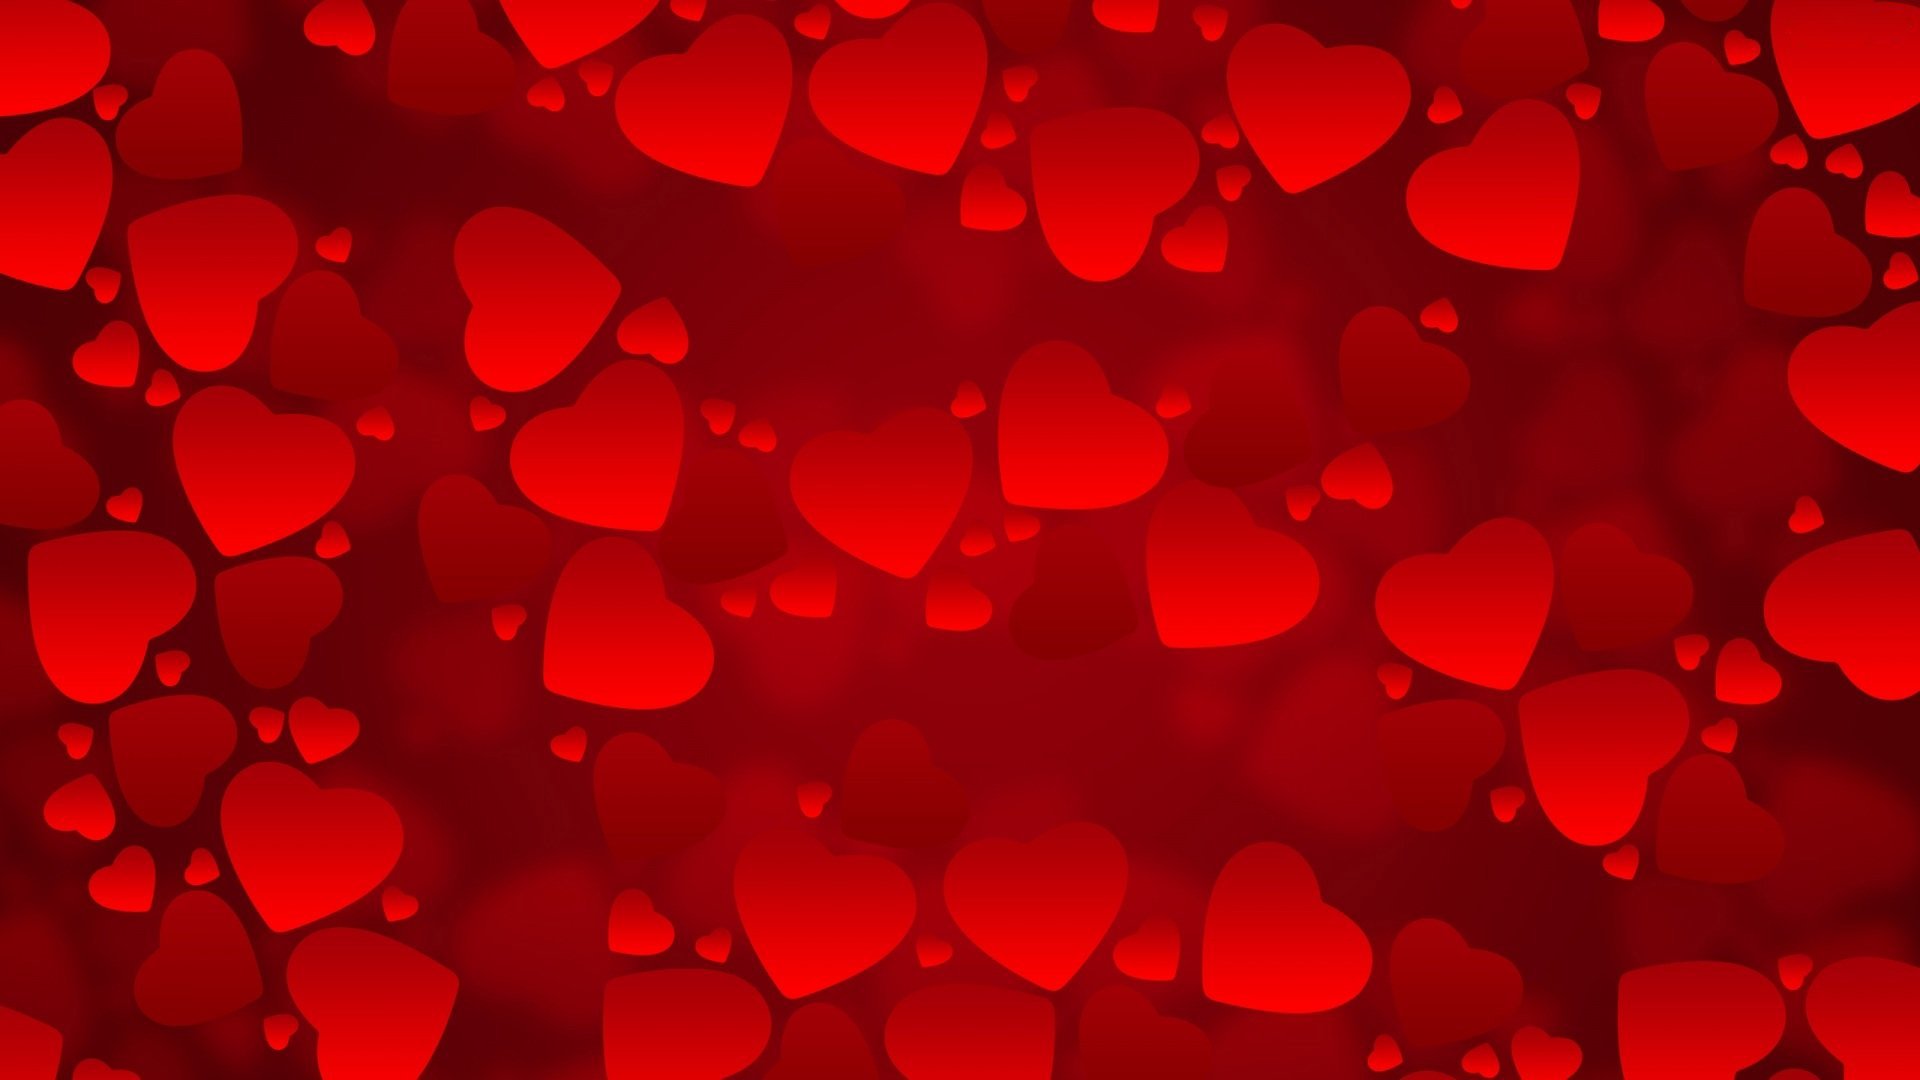 Background for Valentine's Day